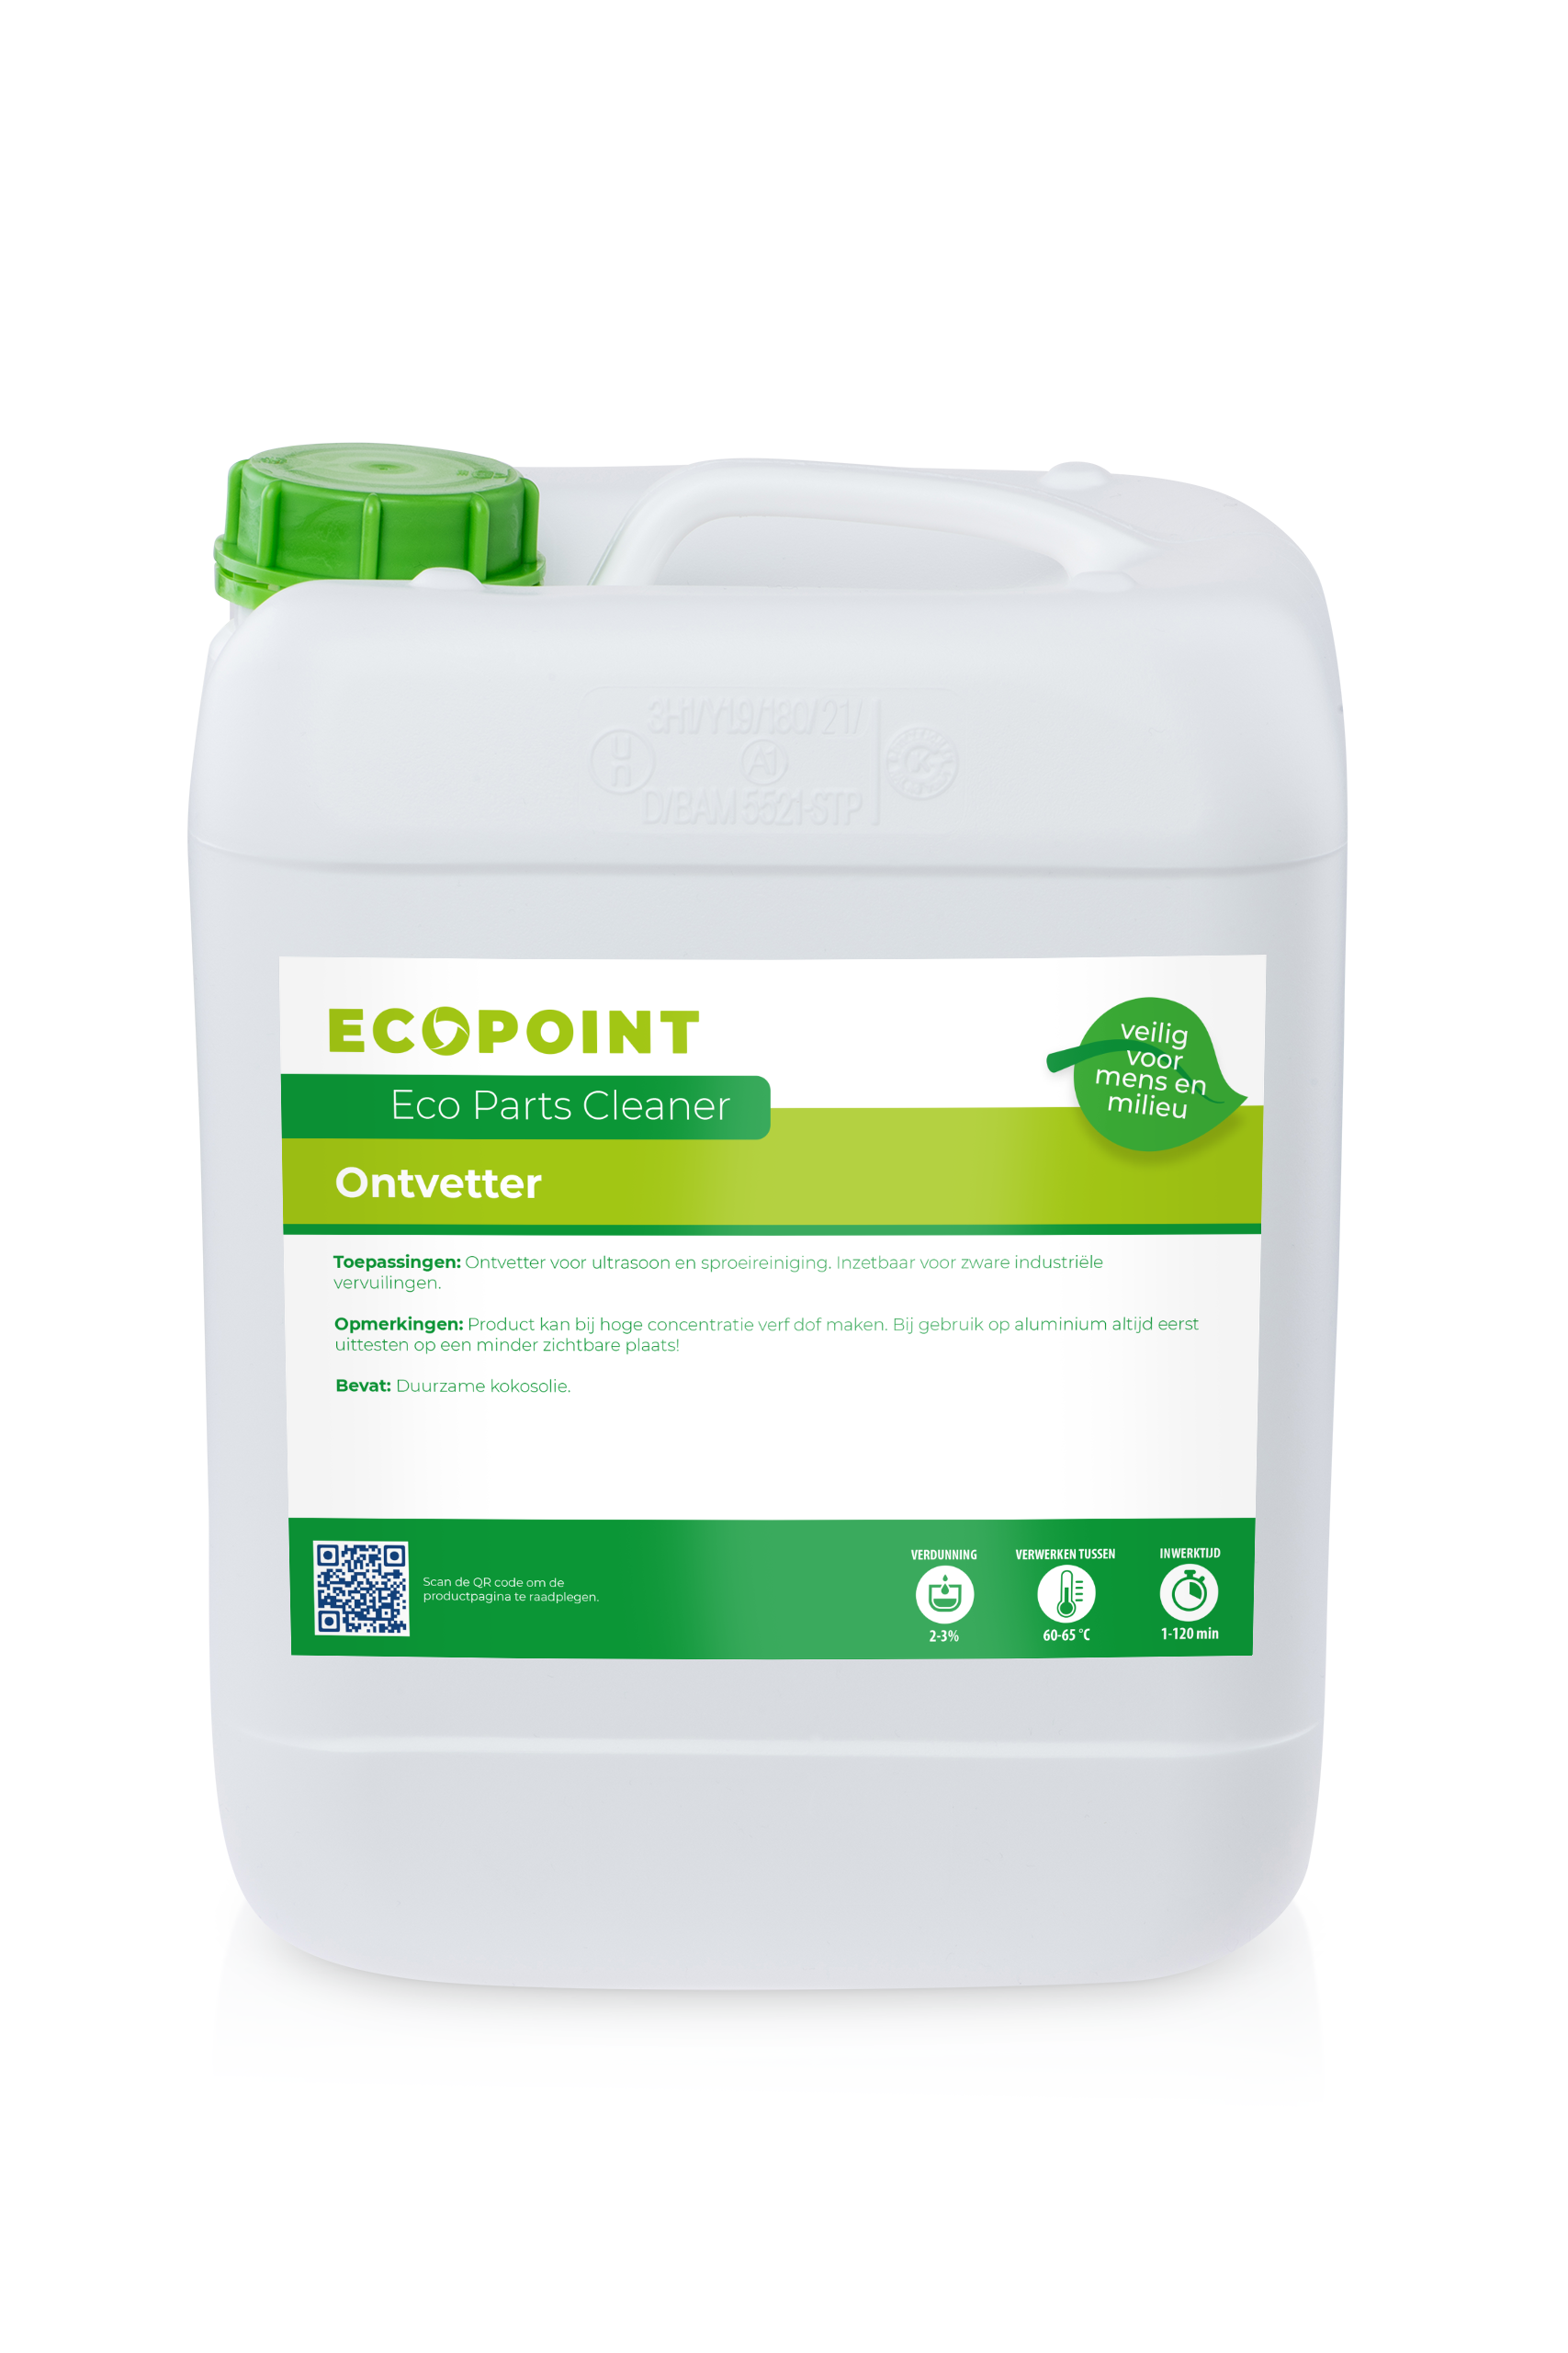 Eco-Parts cleaner